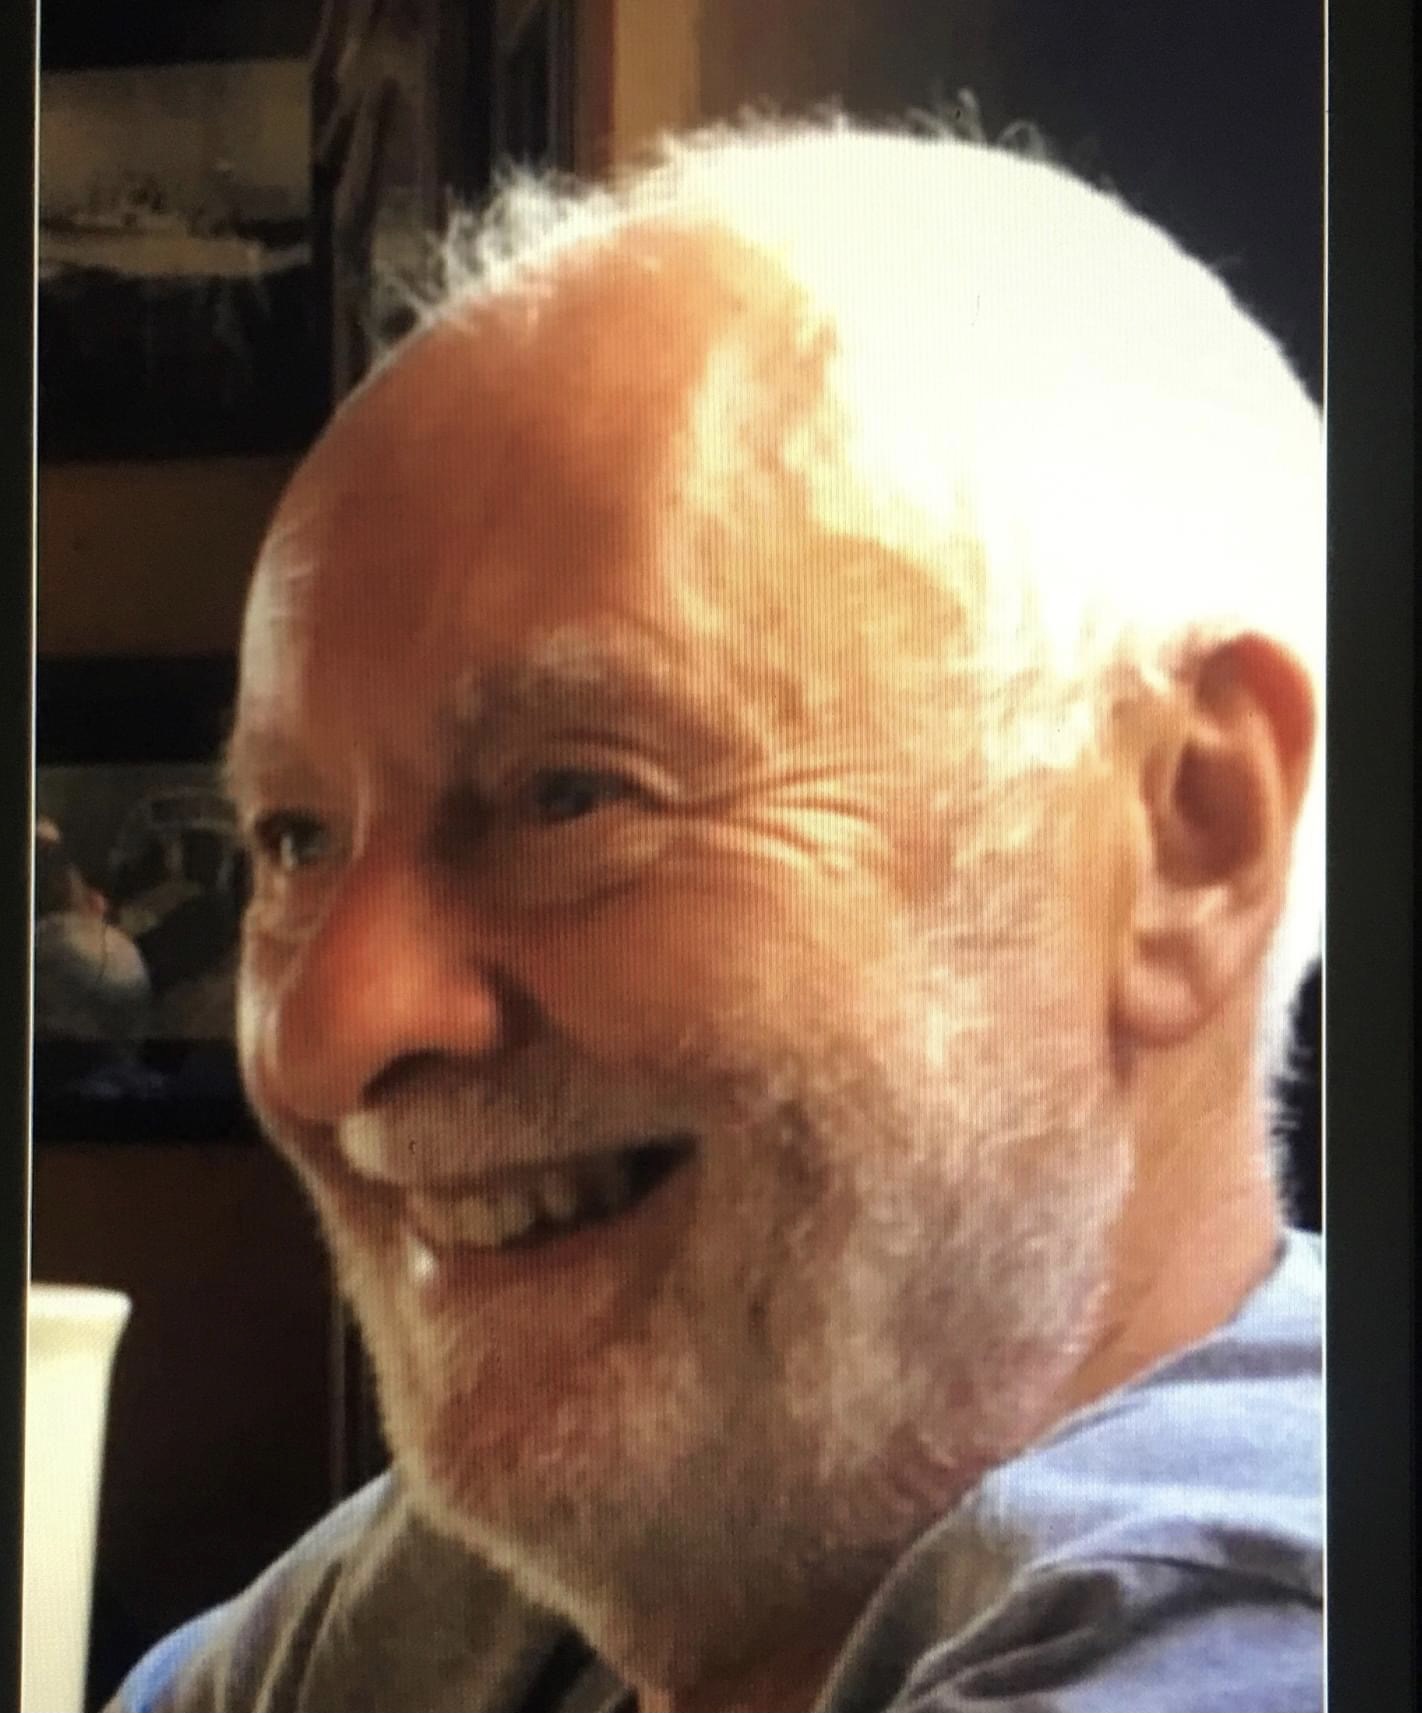 NEWS | Police issue urgent appeal to find missing Herefordshire man